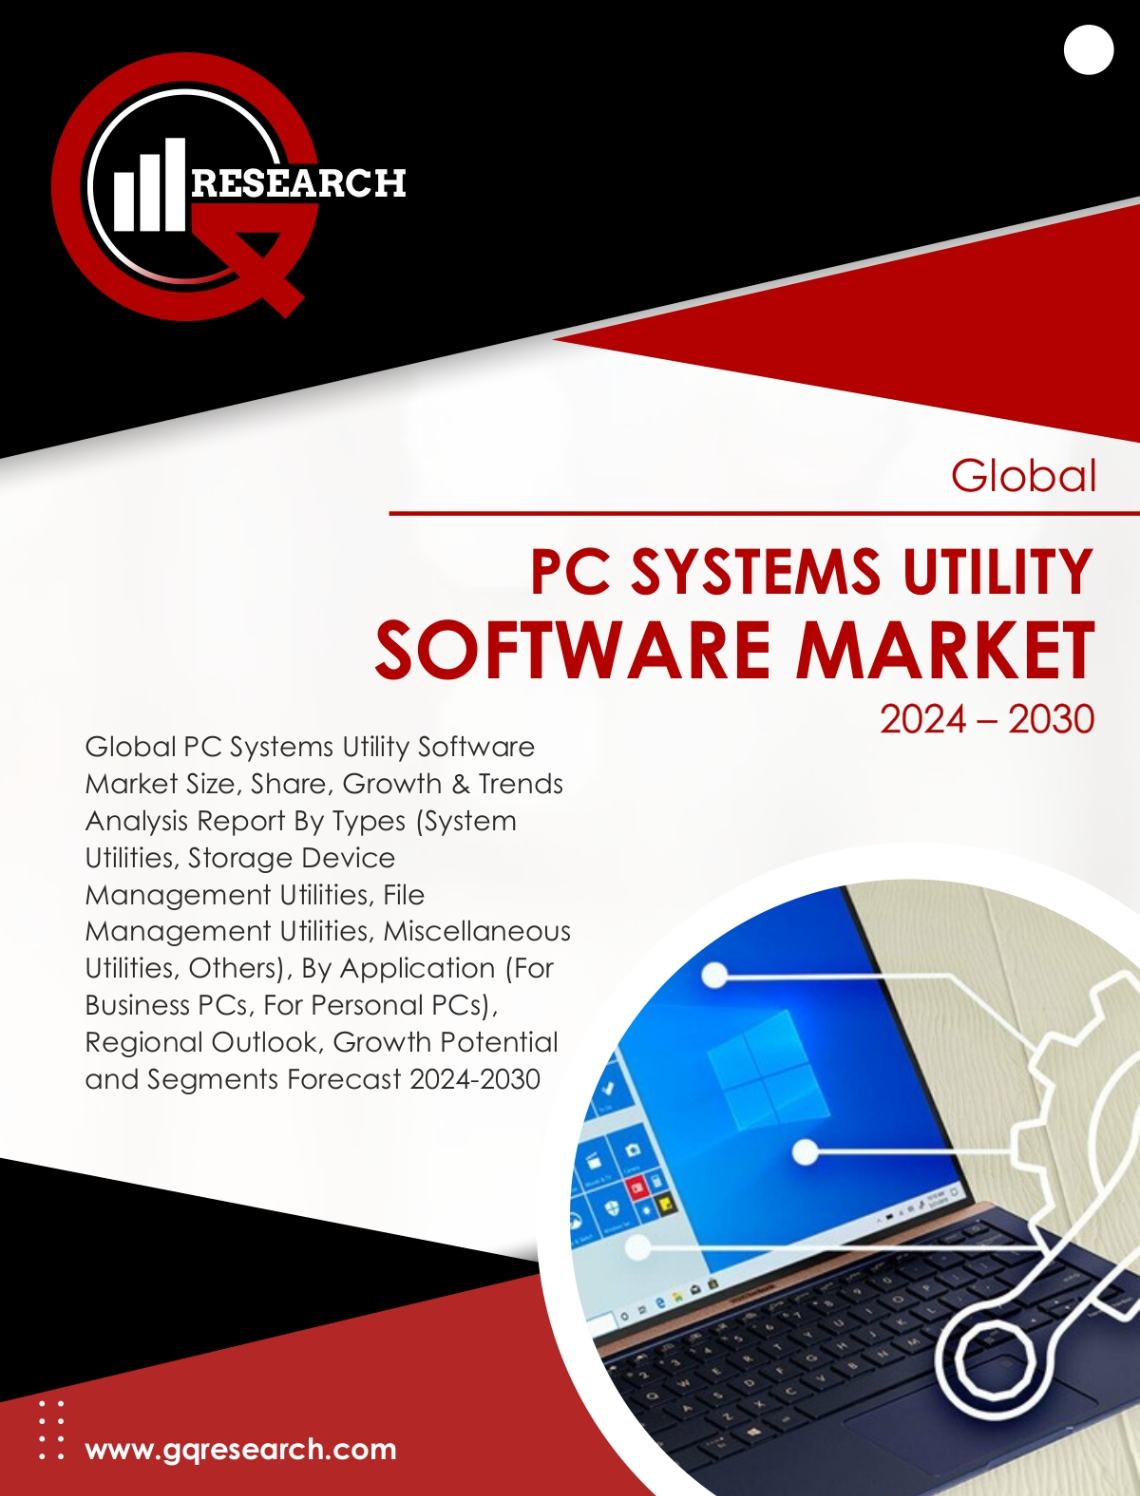 PC Systems Utility Software Market Size, Share & Analysis Forecast to 2030 | GQ Research